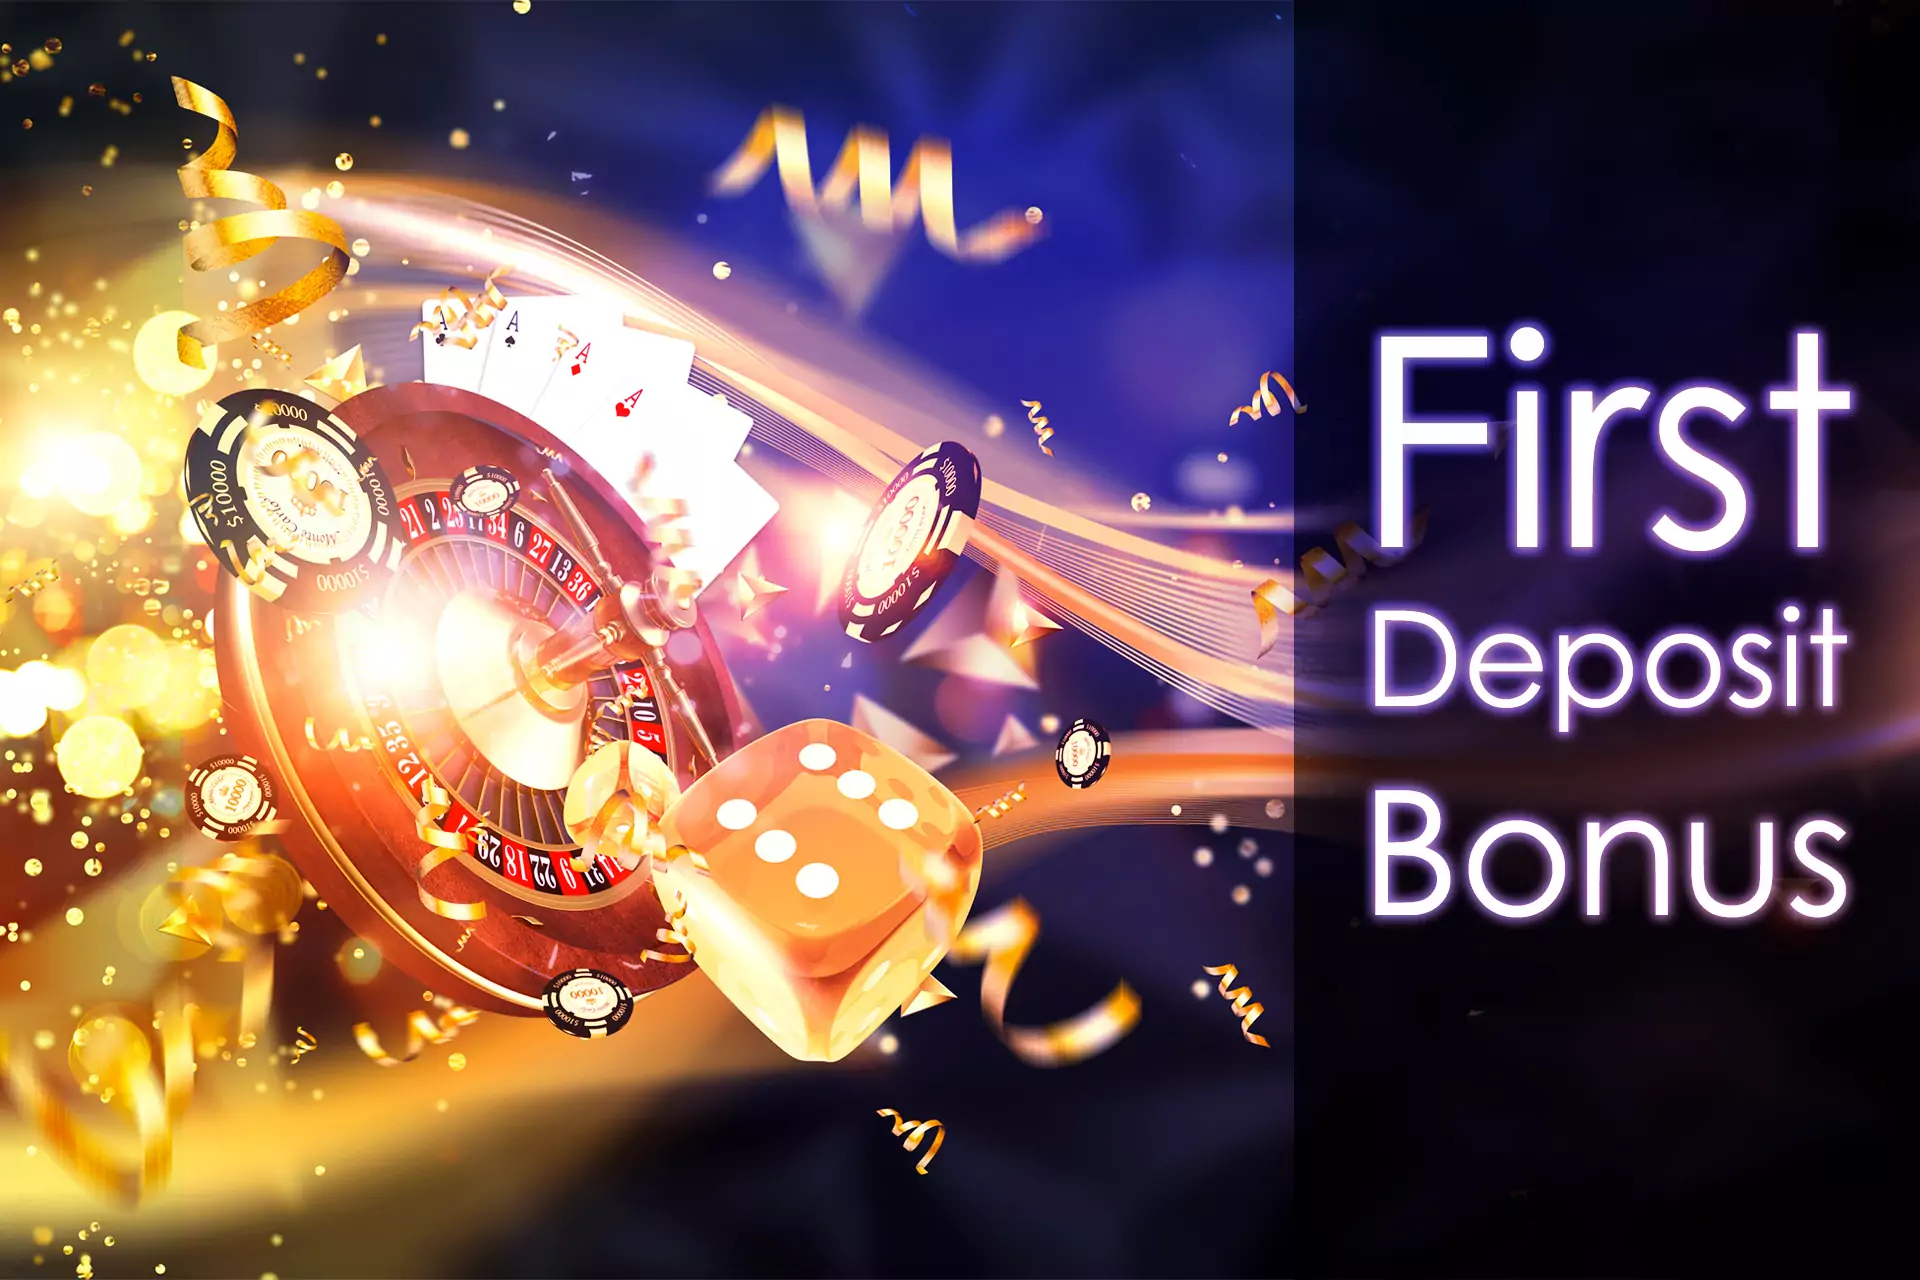 Top up your new casino account to get the first deposit bonus.